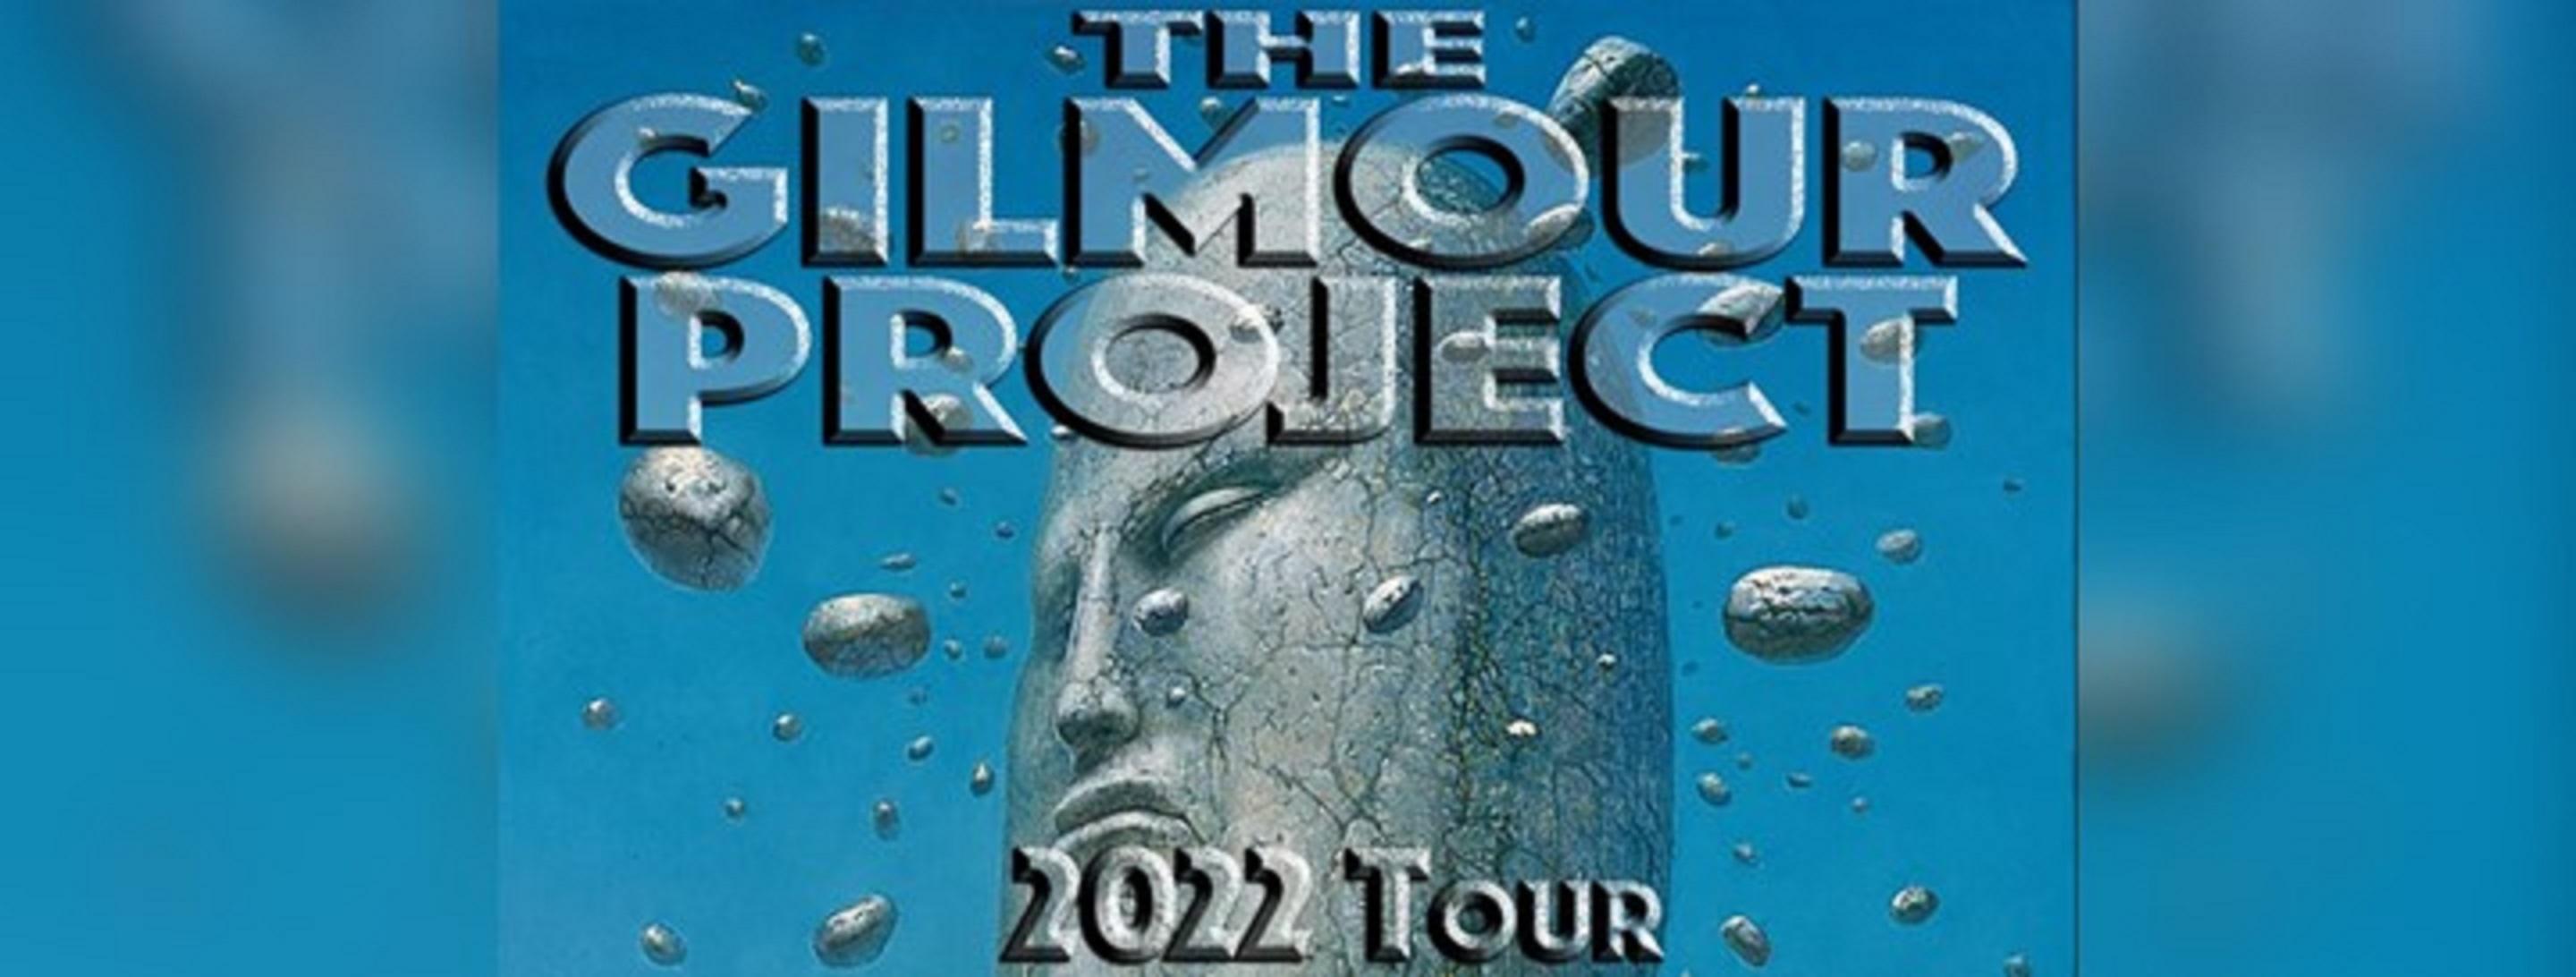 The Gilmour Project Announce 2022 Tour Dates